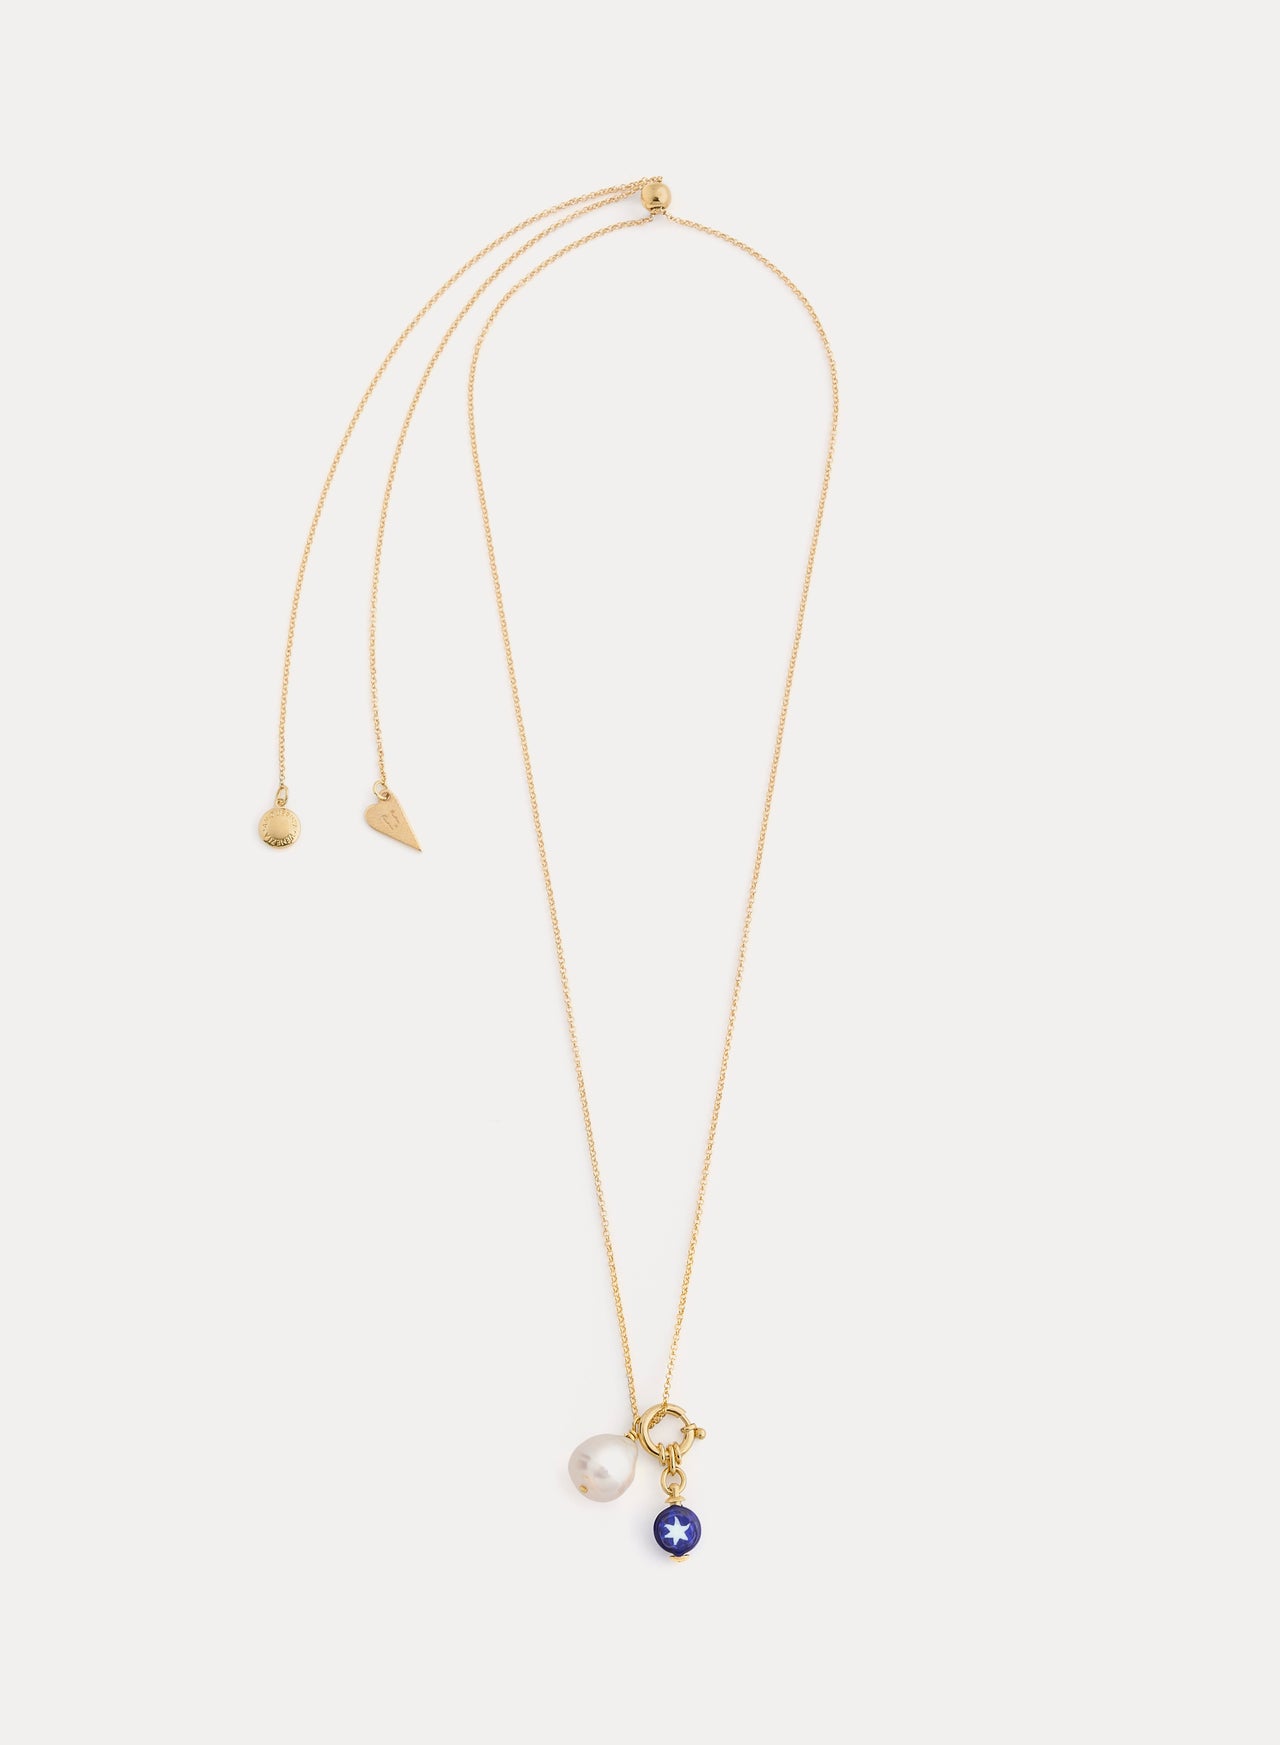 AMOURRINA PEARL NECKLACE - 18K GOLD PLATE